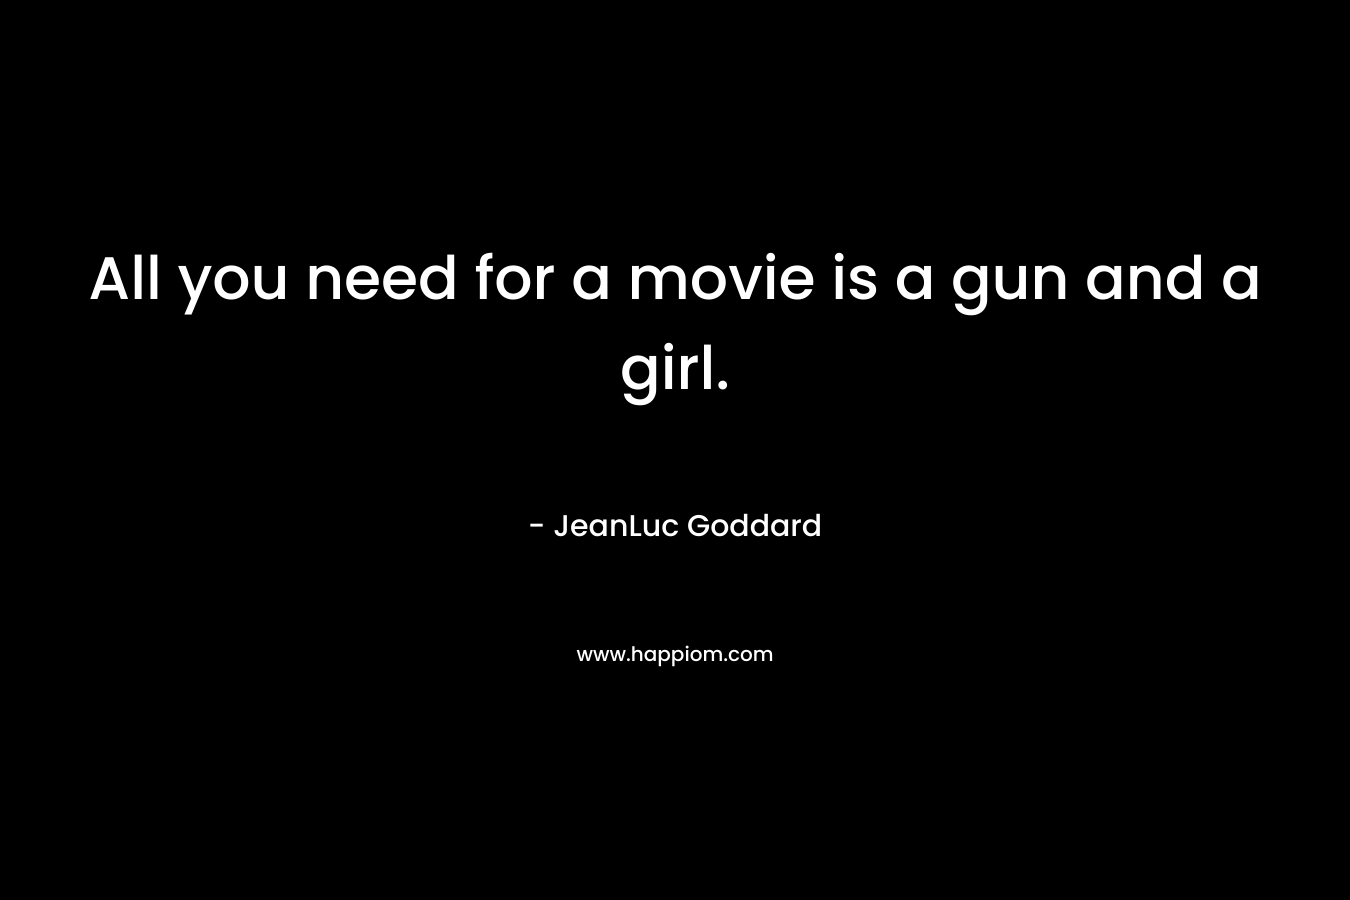 All you need for a movie is a gun and a girl. – JeanLuc Goddard